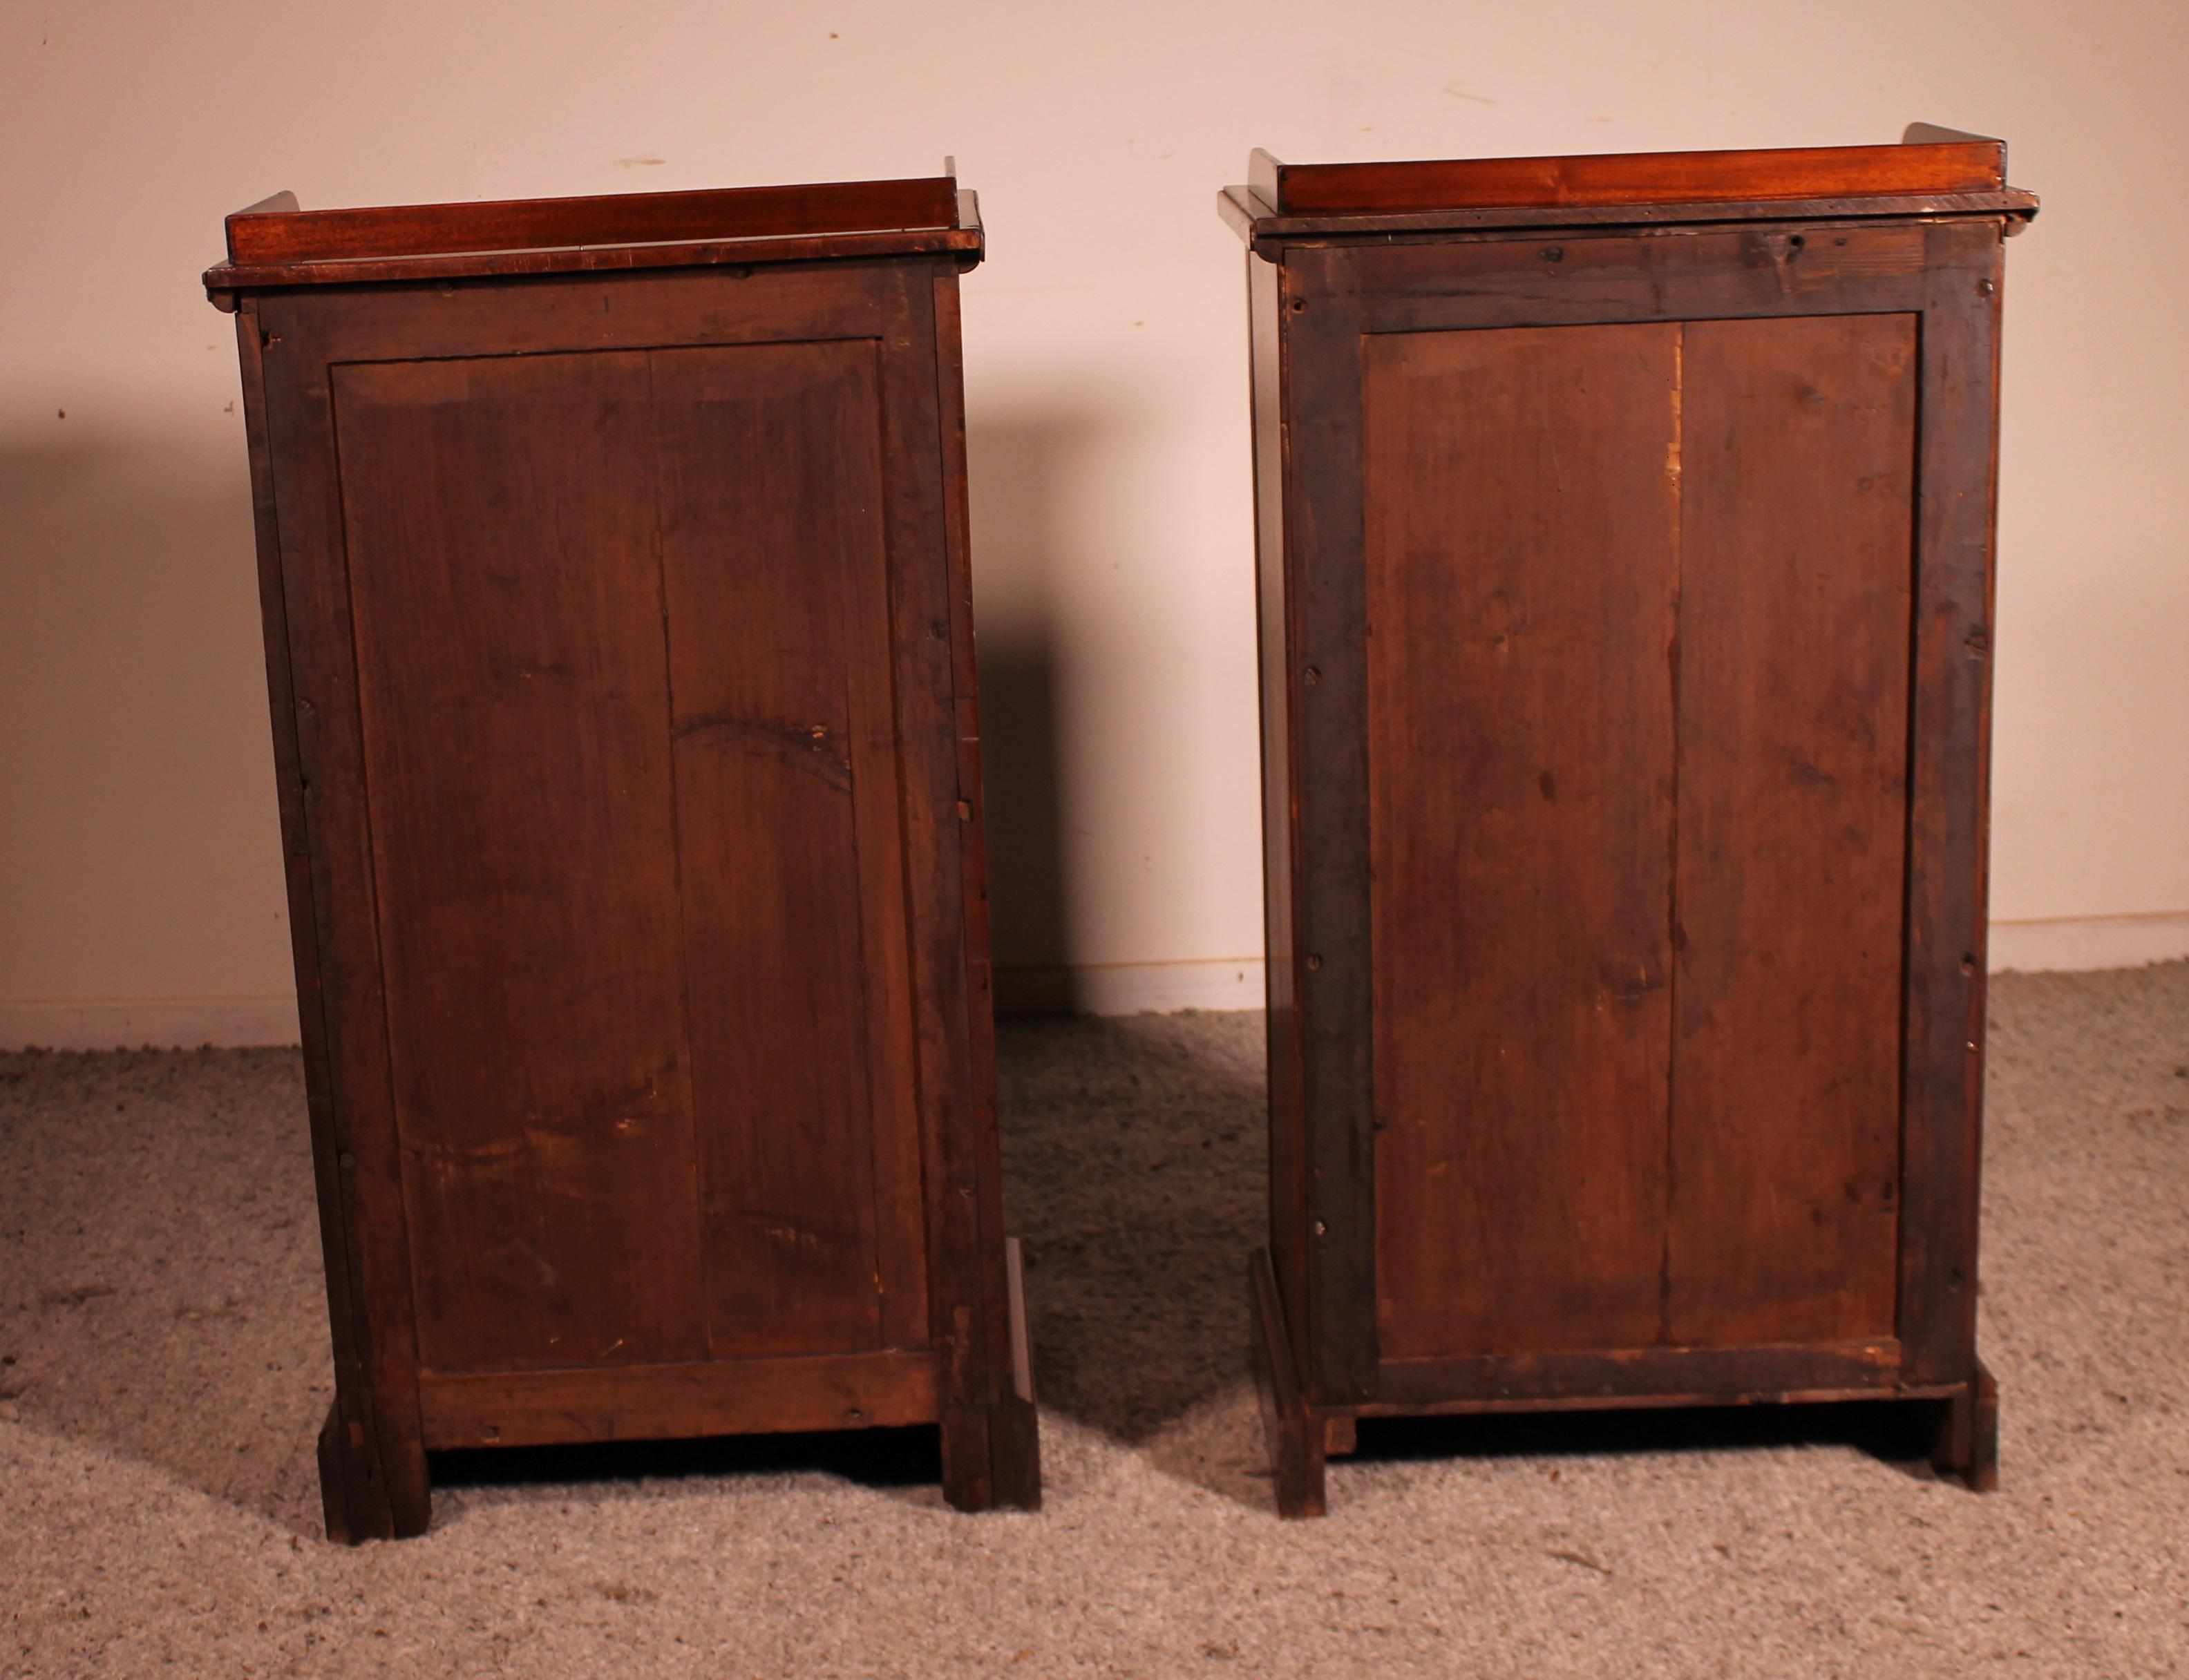 Pair of Open Bookcases from the Beginning of the 19th Century, William IV 2